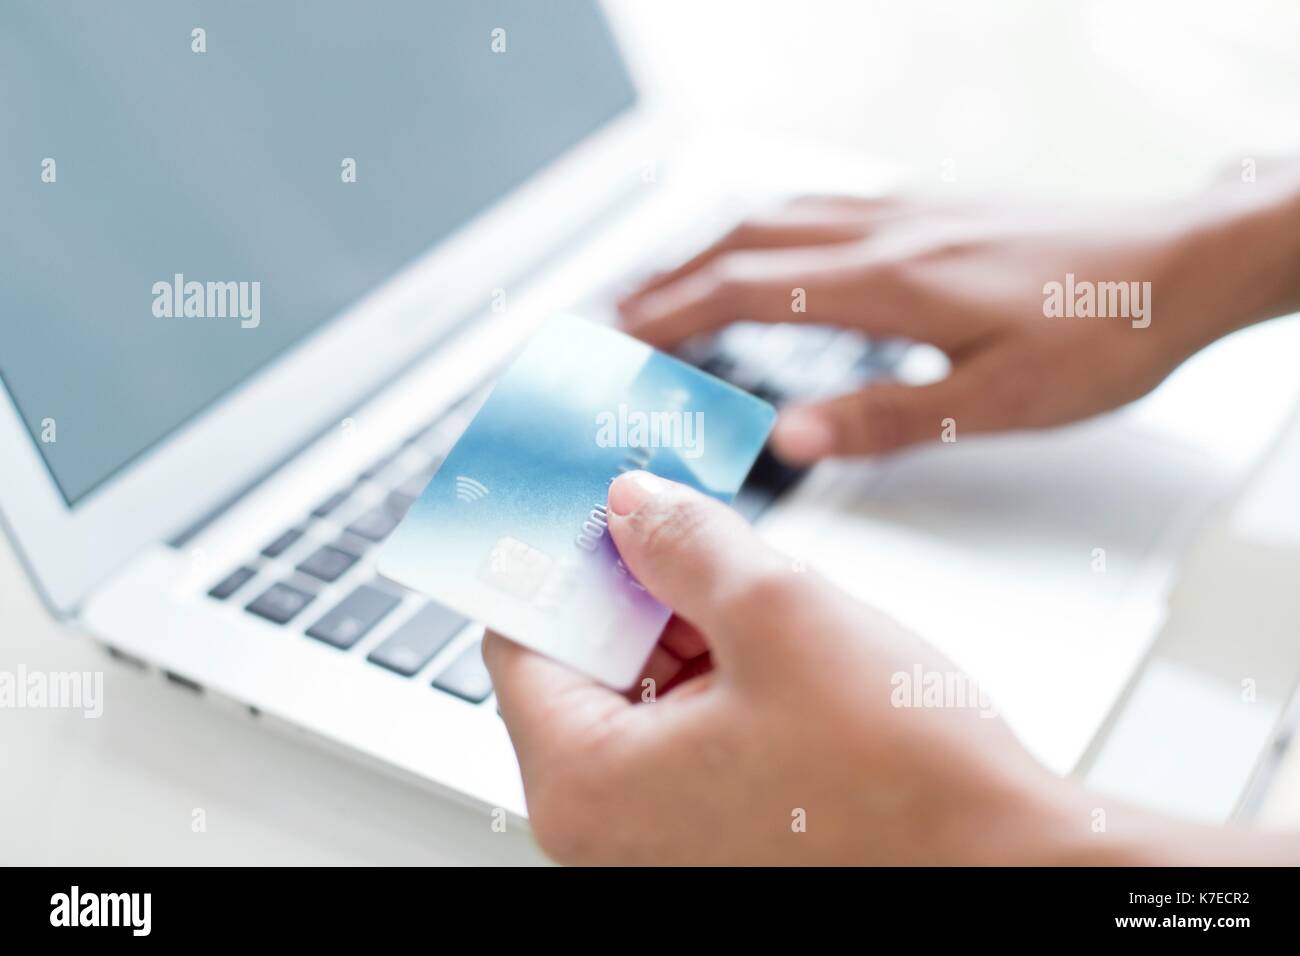 Woman using credit card and laptop. Stock Photo